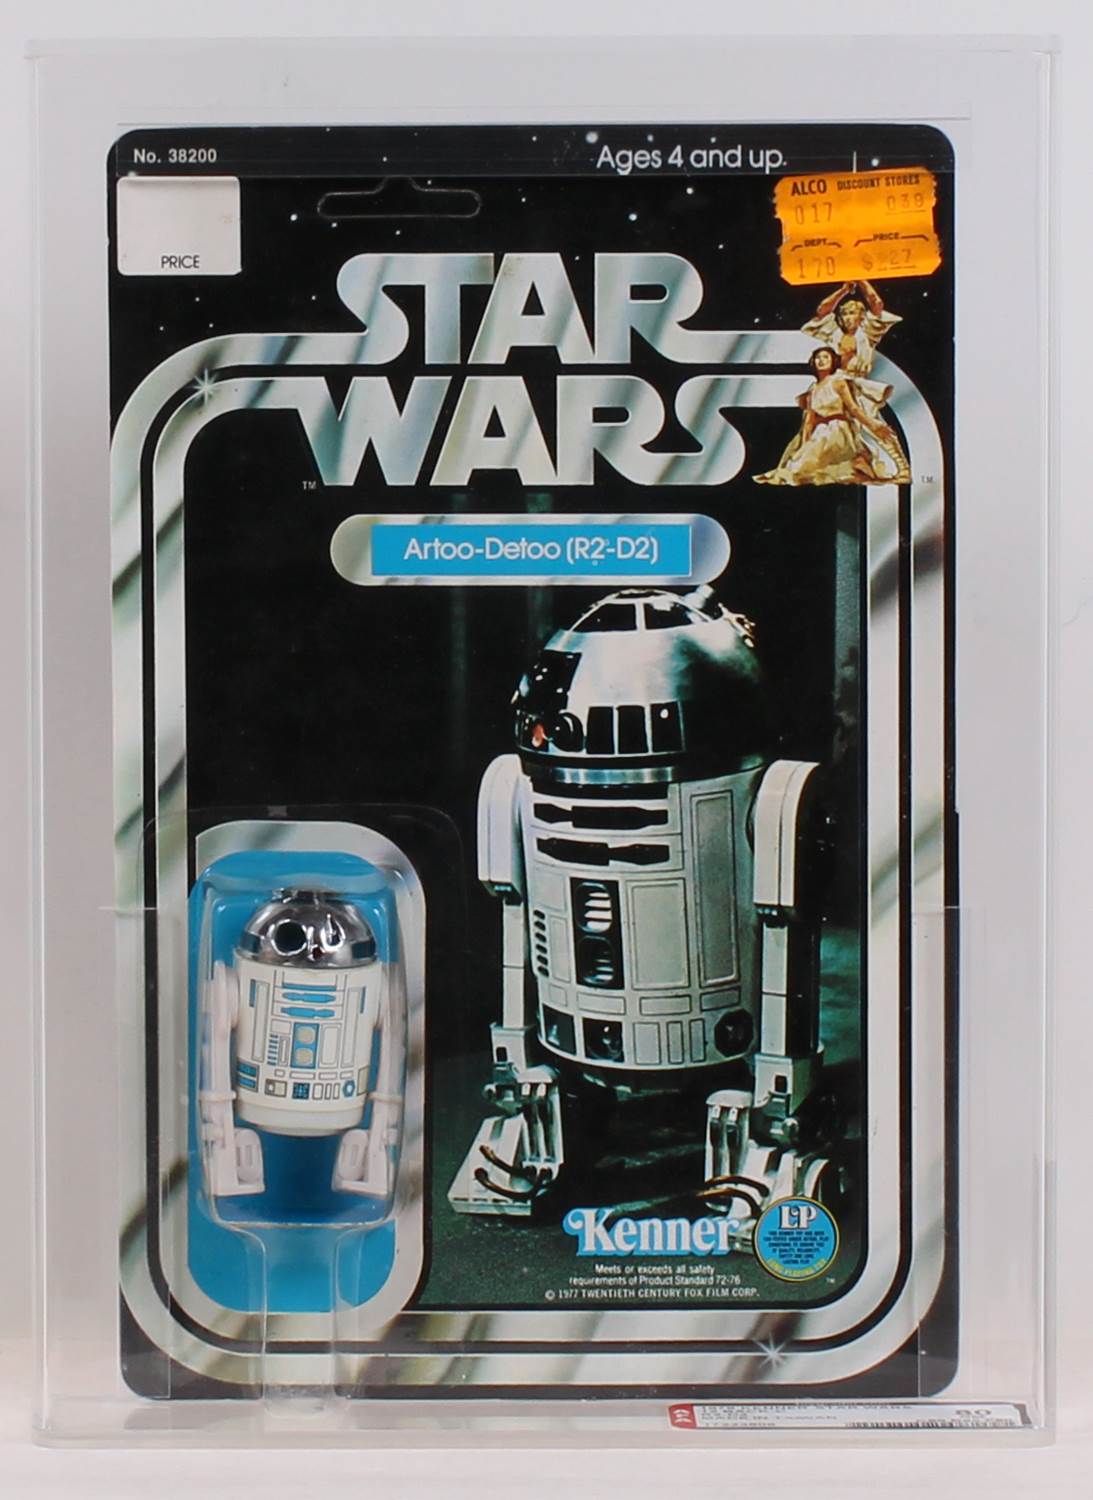 R2-D2 as originally released by Kenner